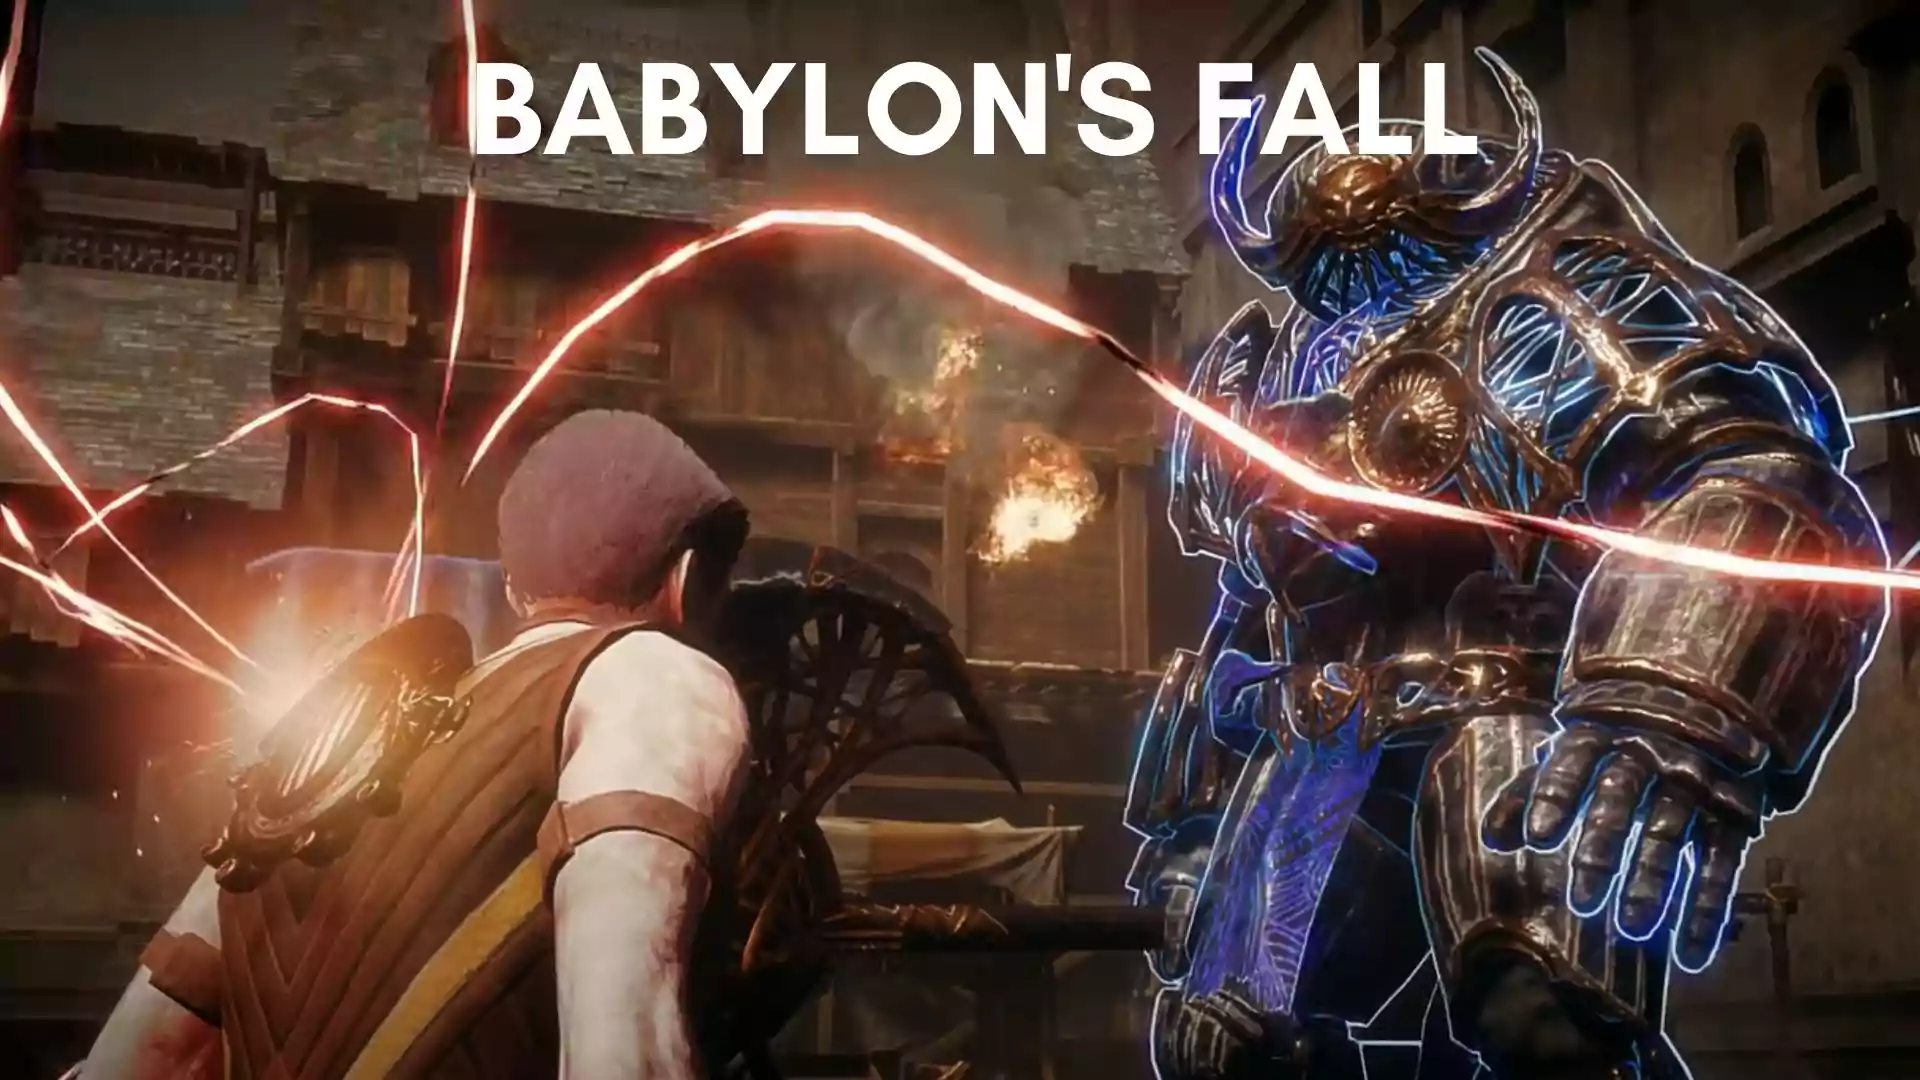 Babylon's Fall Parents Guide and Age Rating